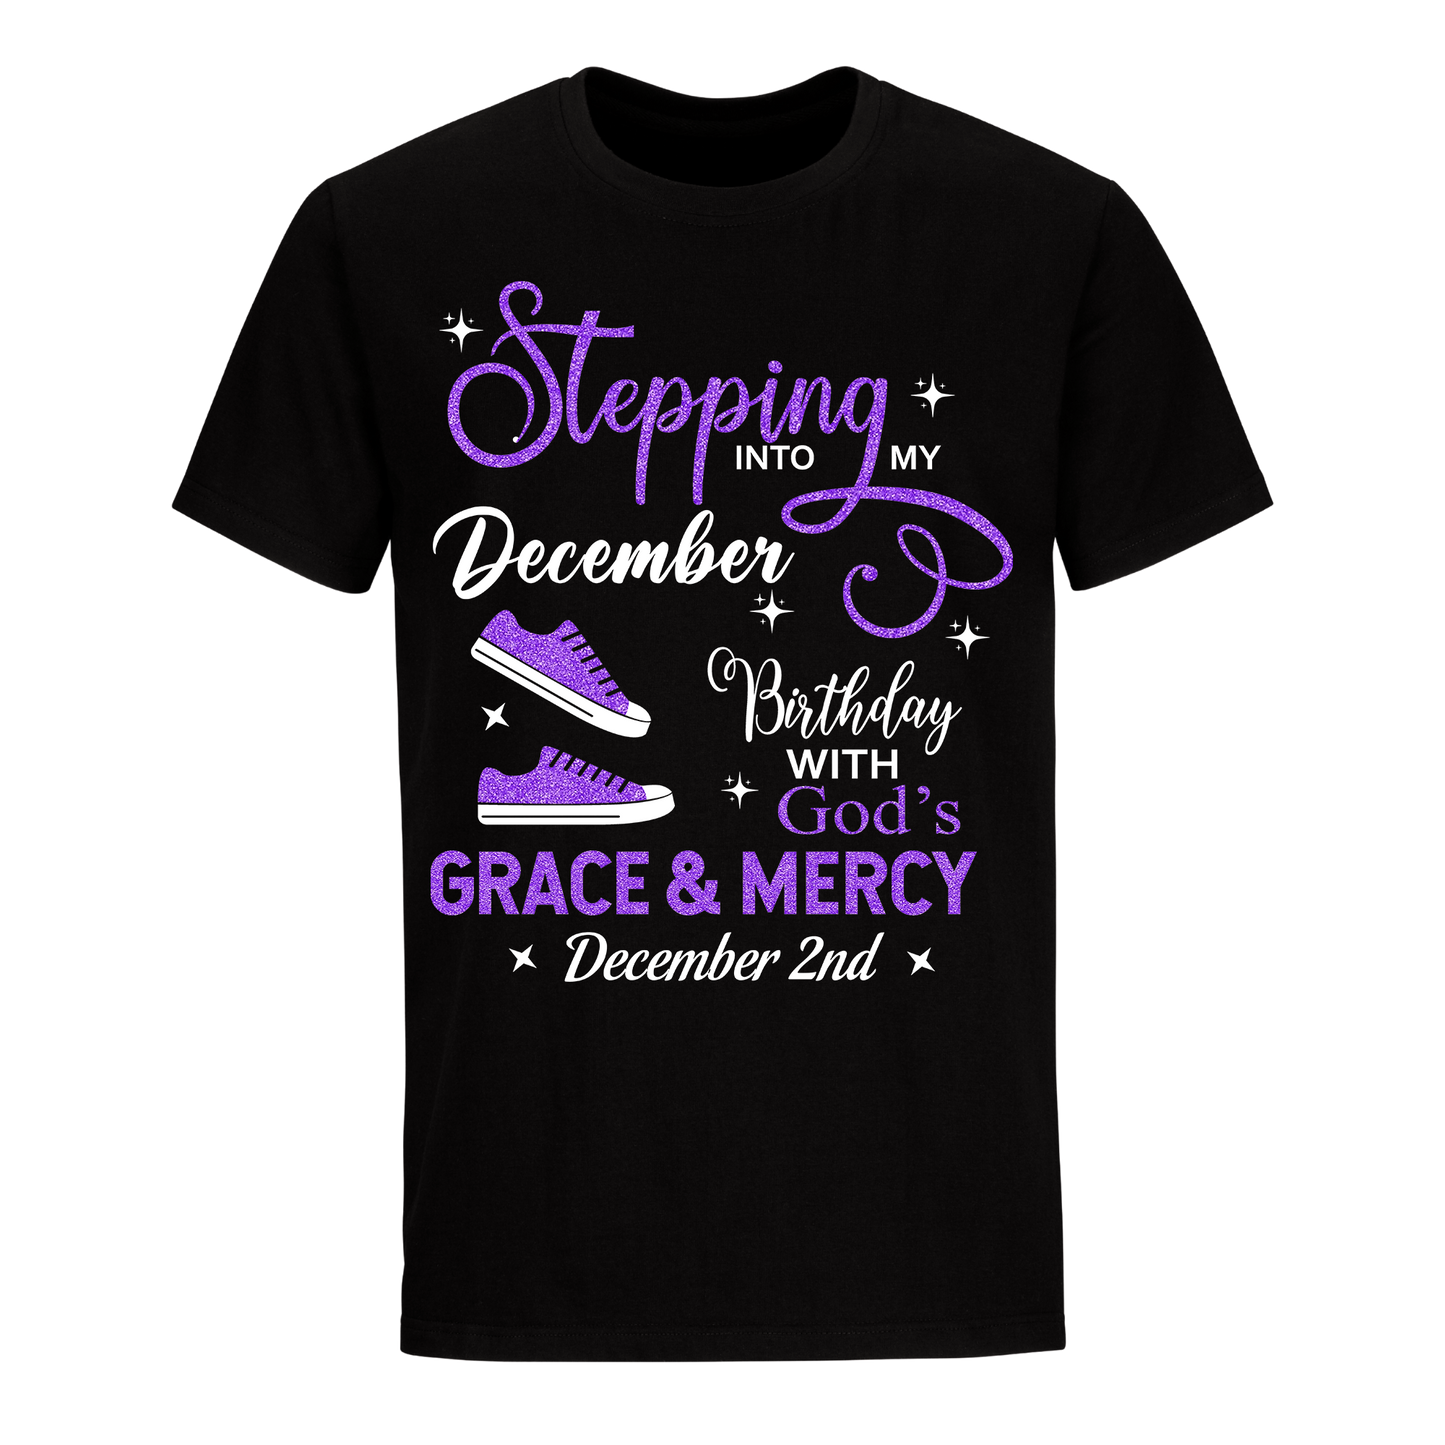 DECEMBER 02 GRACE AND MERCY